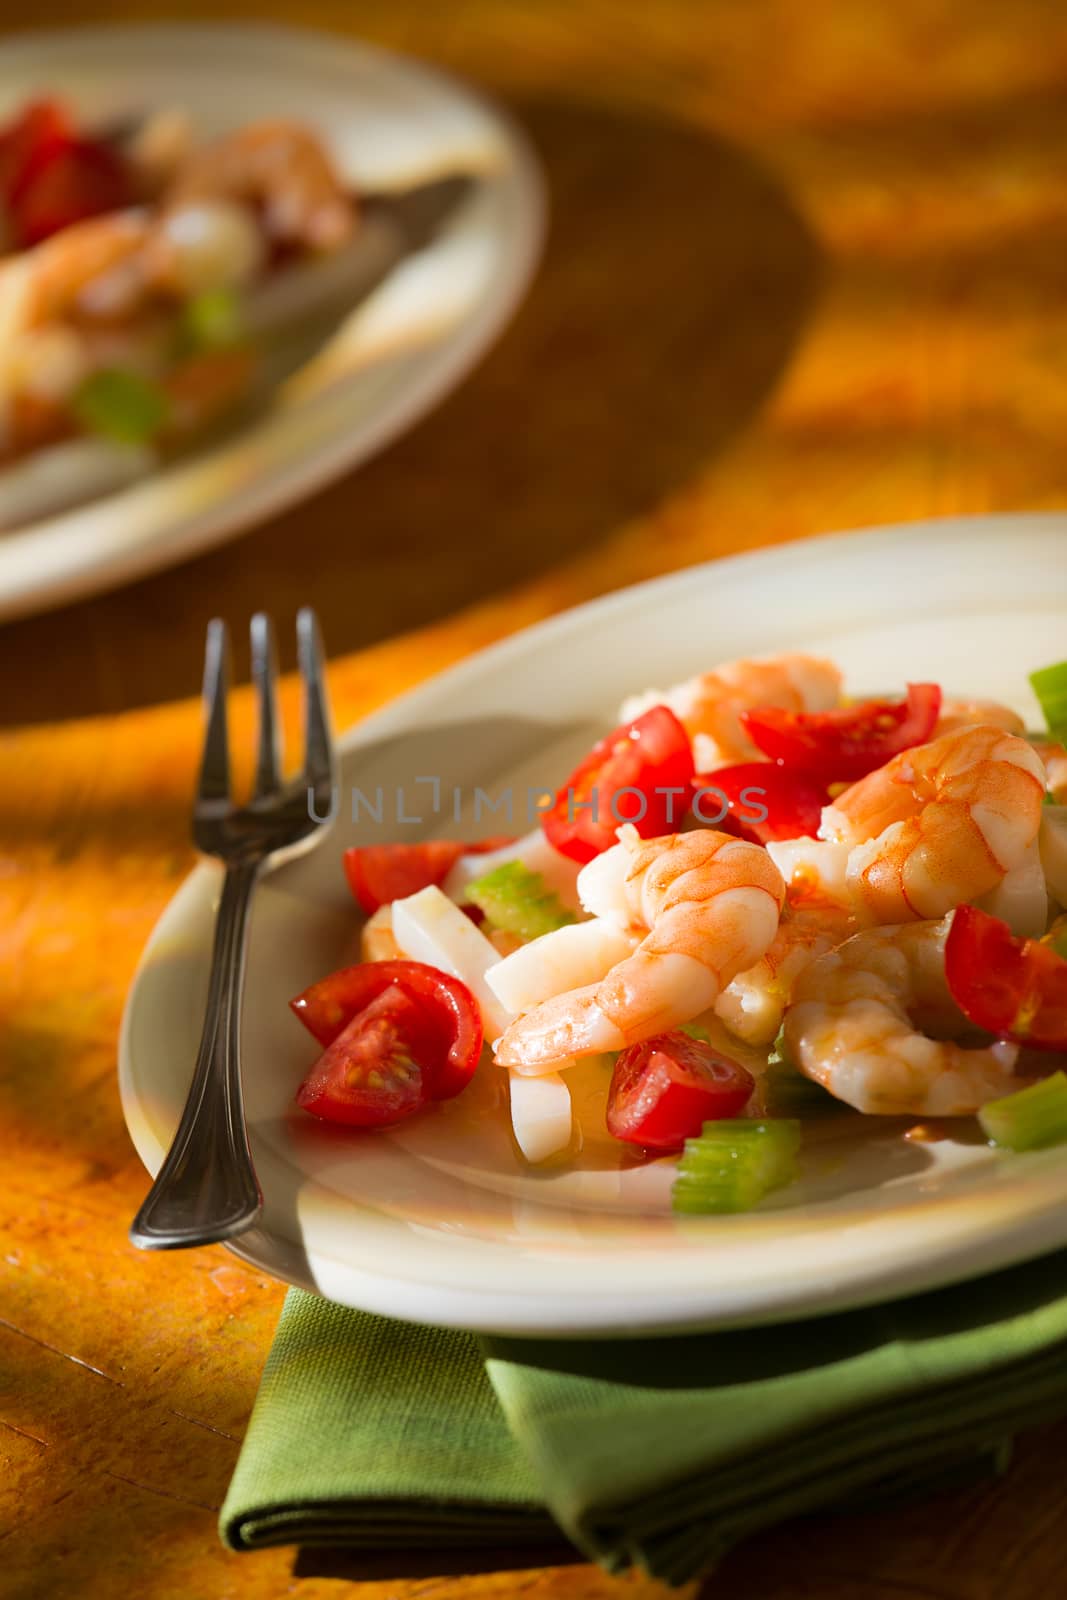 Shrimp salad with squid tomatoes and celery over a green napkin with an orange background